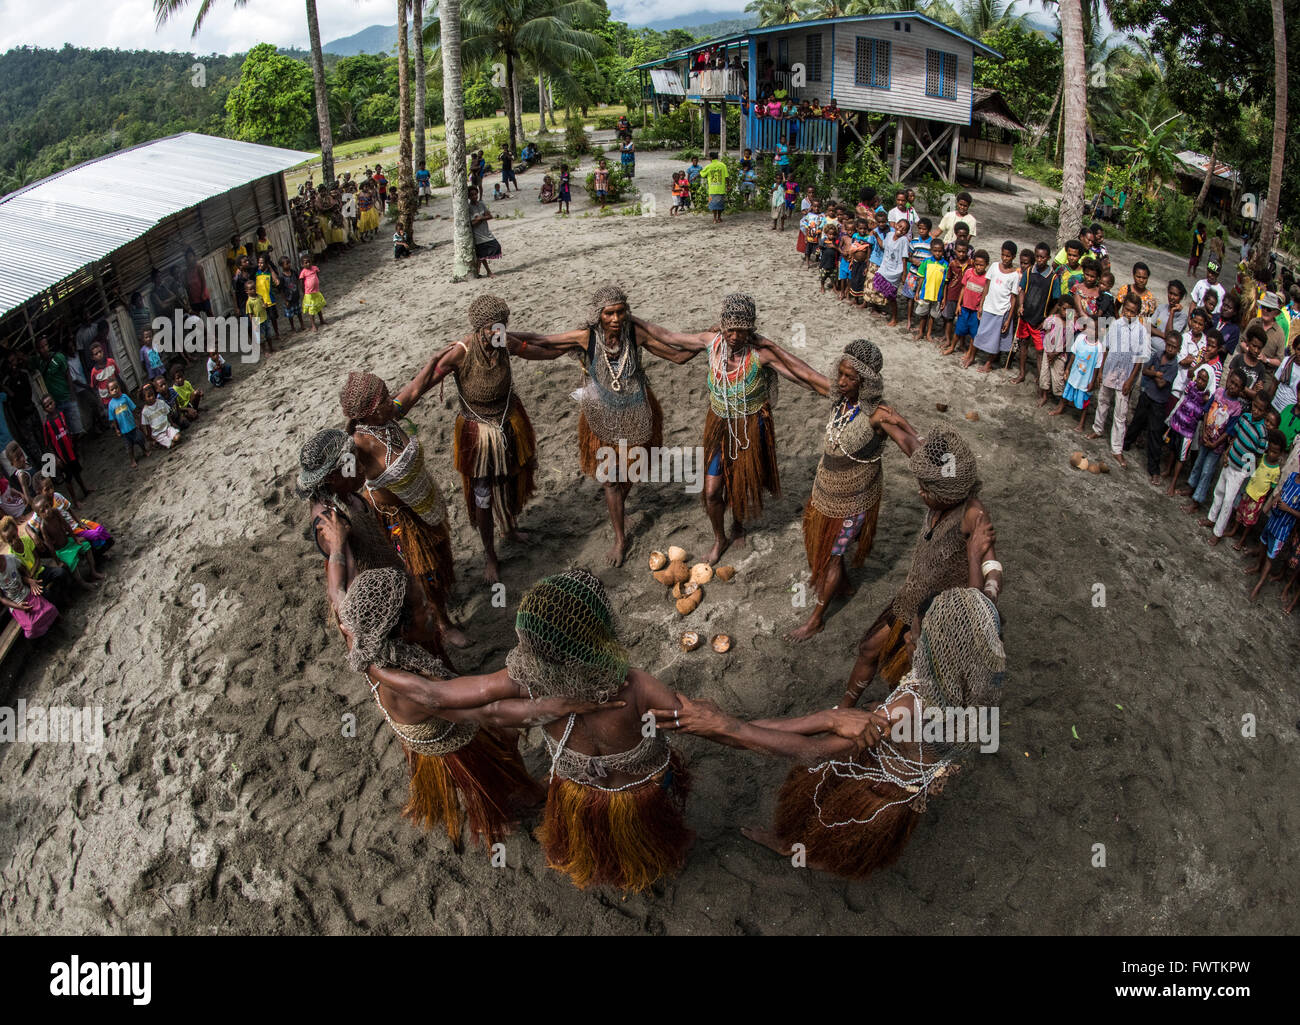 Local Dancers women performing a traditional dance Lababia, Papua New Guinea Stock Photo